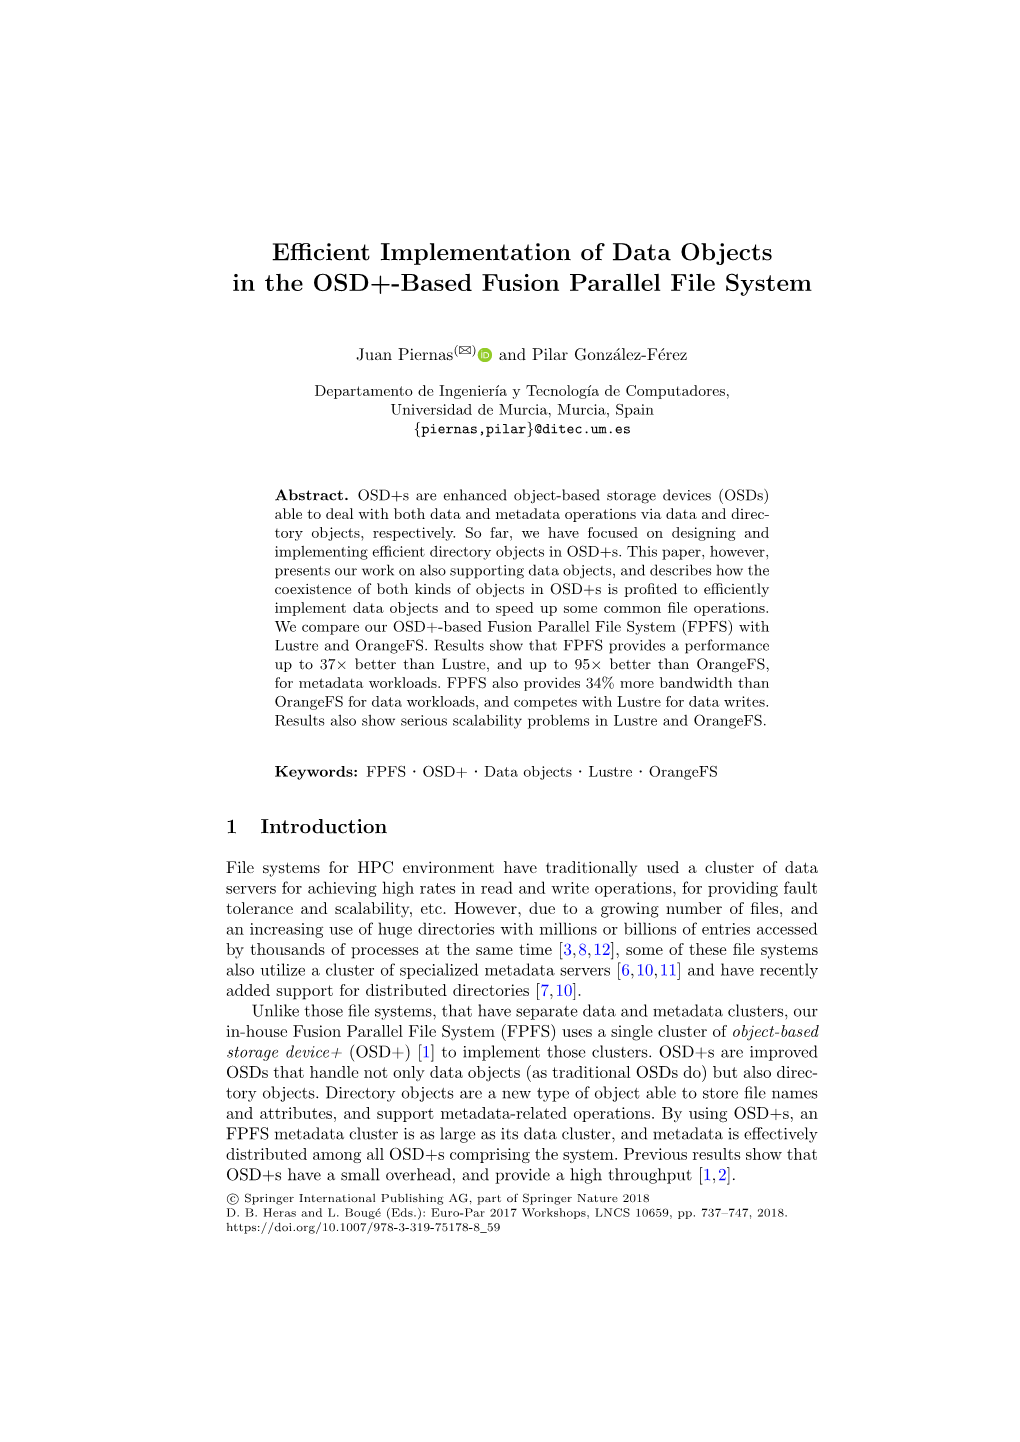 Efficient Implementation of Data Objects in the OSD+-Based Fusion